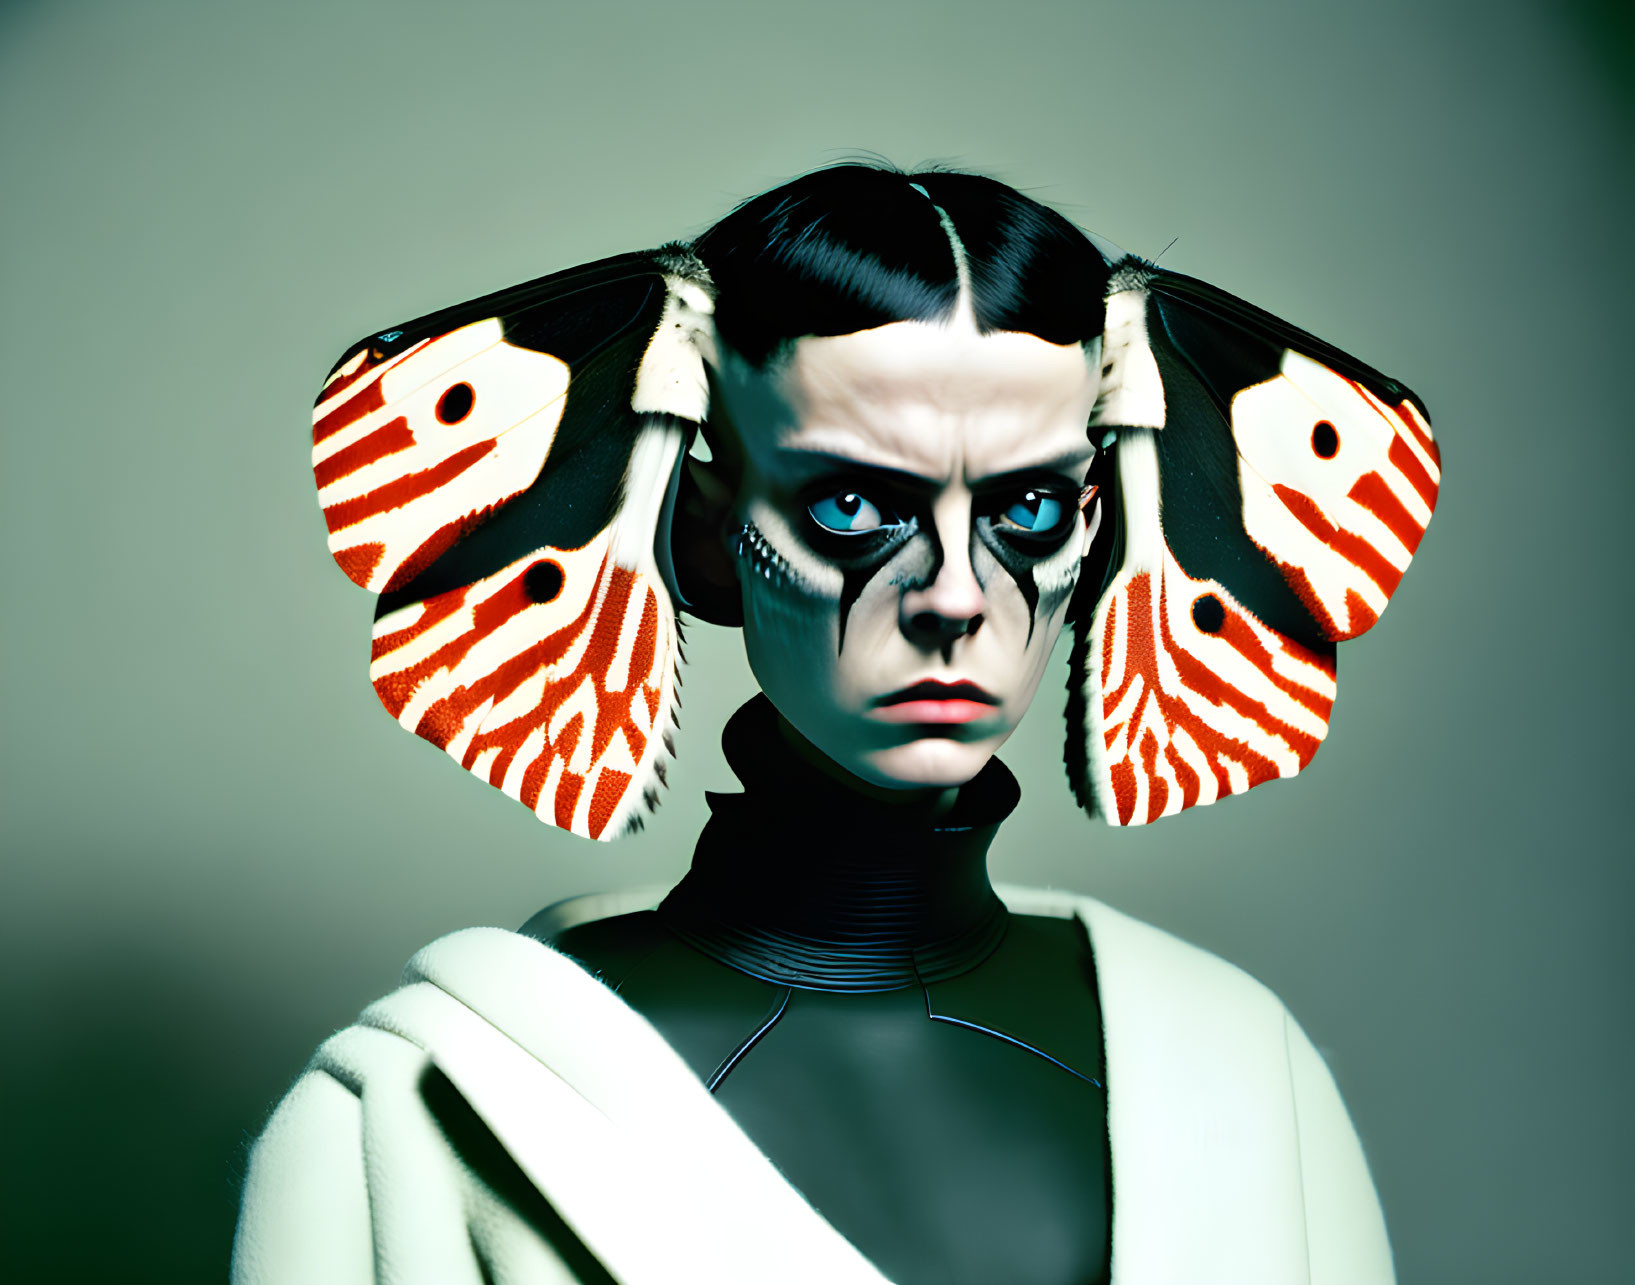 Butterfly-themed face paint with large wings on head, intense stare.